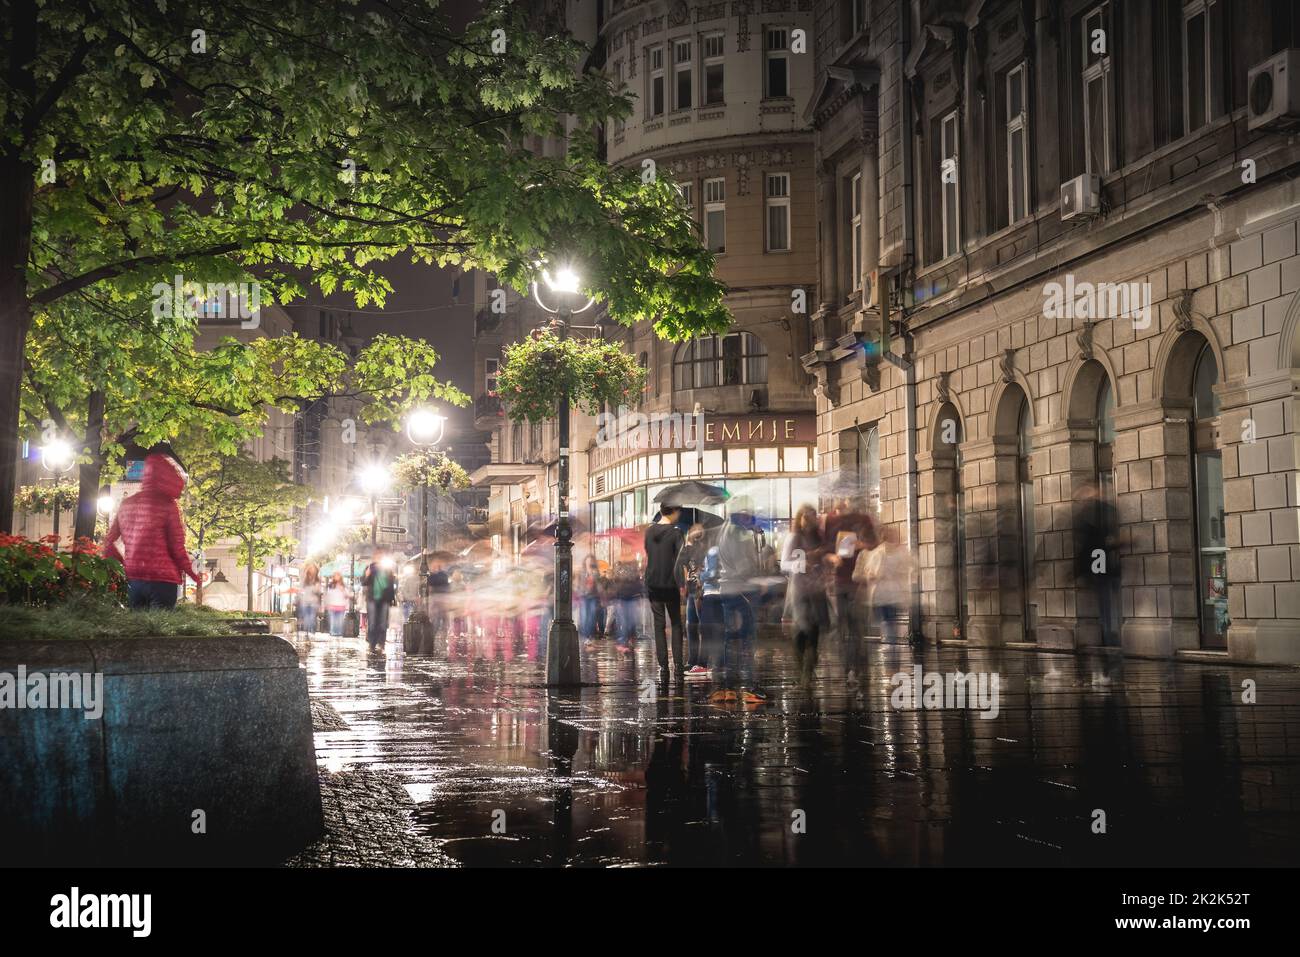 BELGRADE, SERBIA - SEPTEMBER 25: Rainy inght at Knez Mihailova Street on September 25, 2015 in Belgrade, Serbia. Street is the main shopping mile of Belgrade Stock Photo